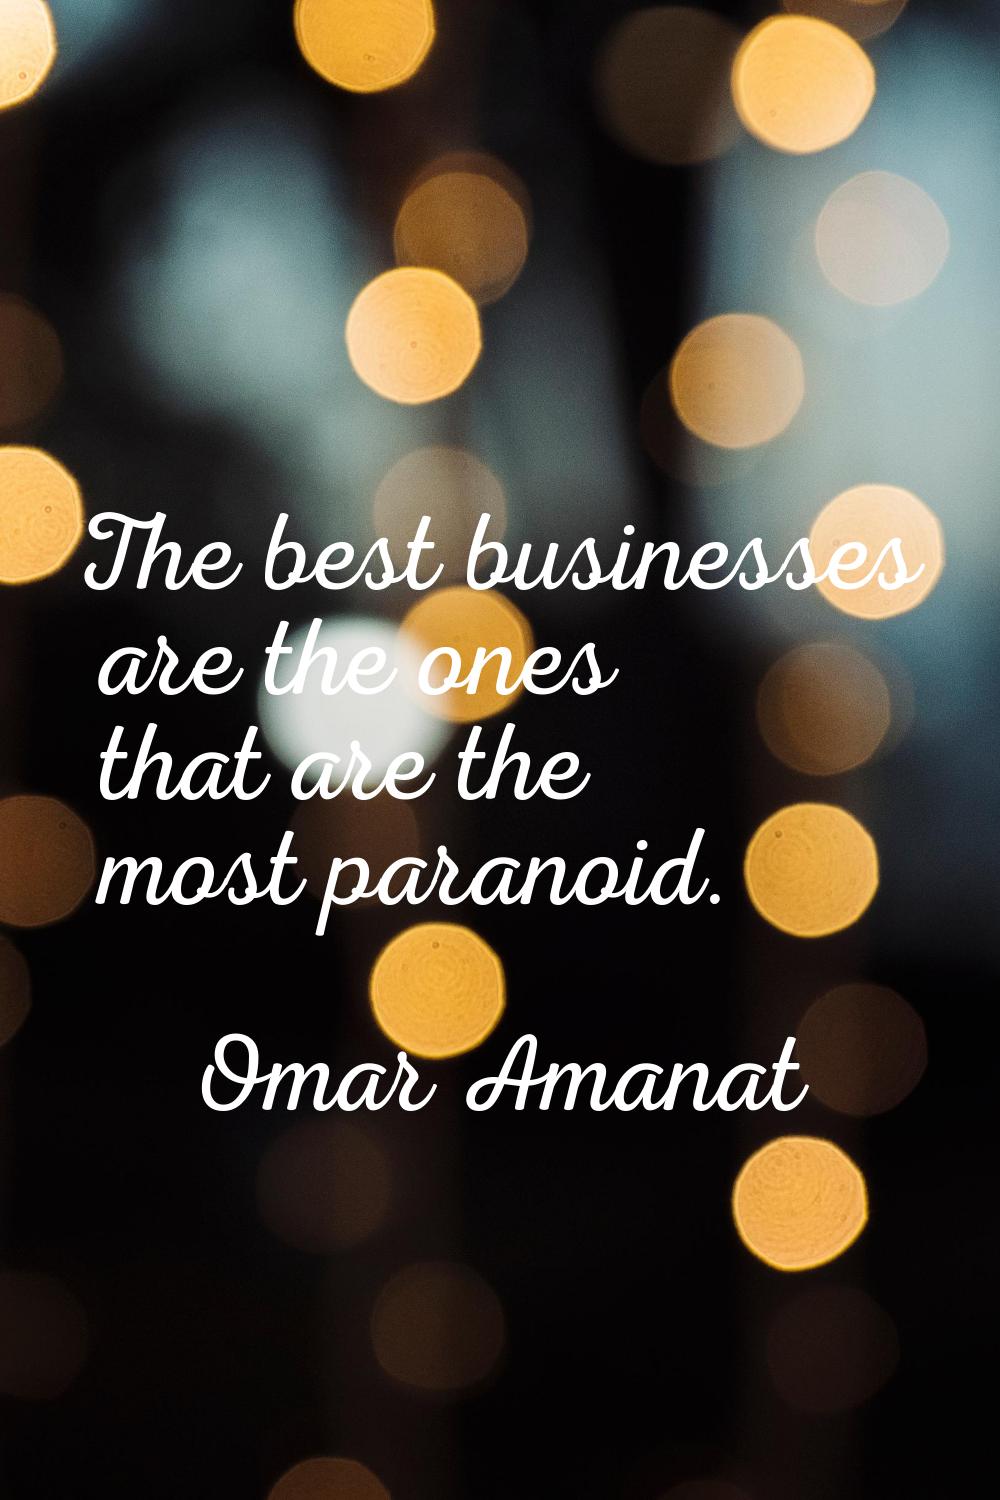 The best businesses are the ones that are the most paranoid.